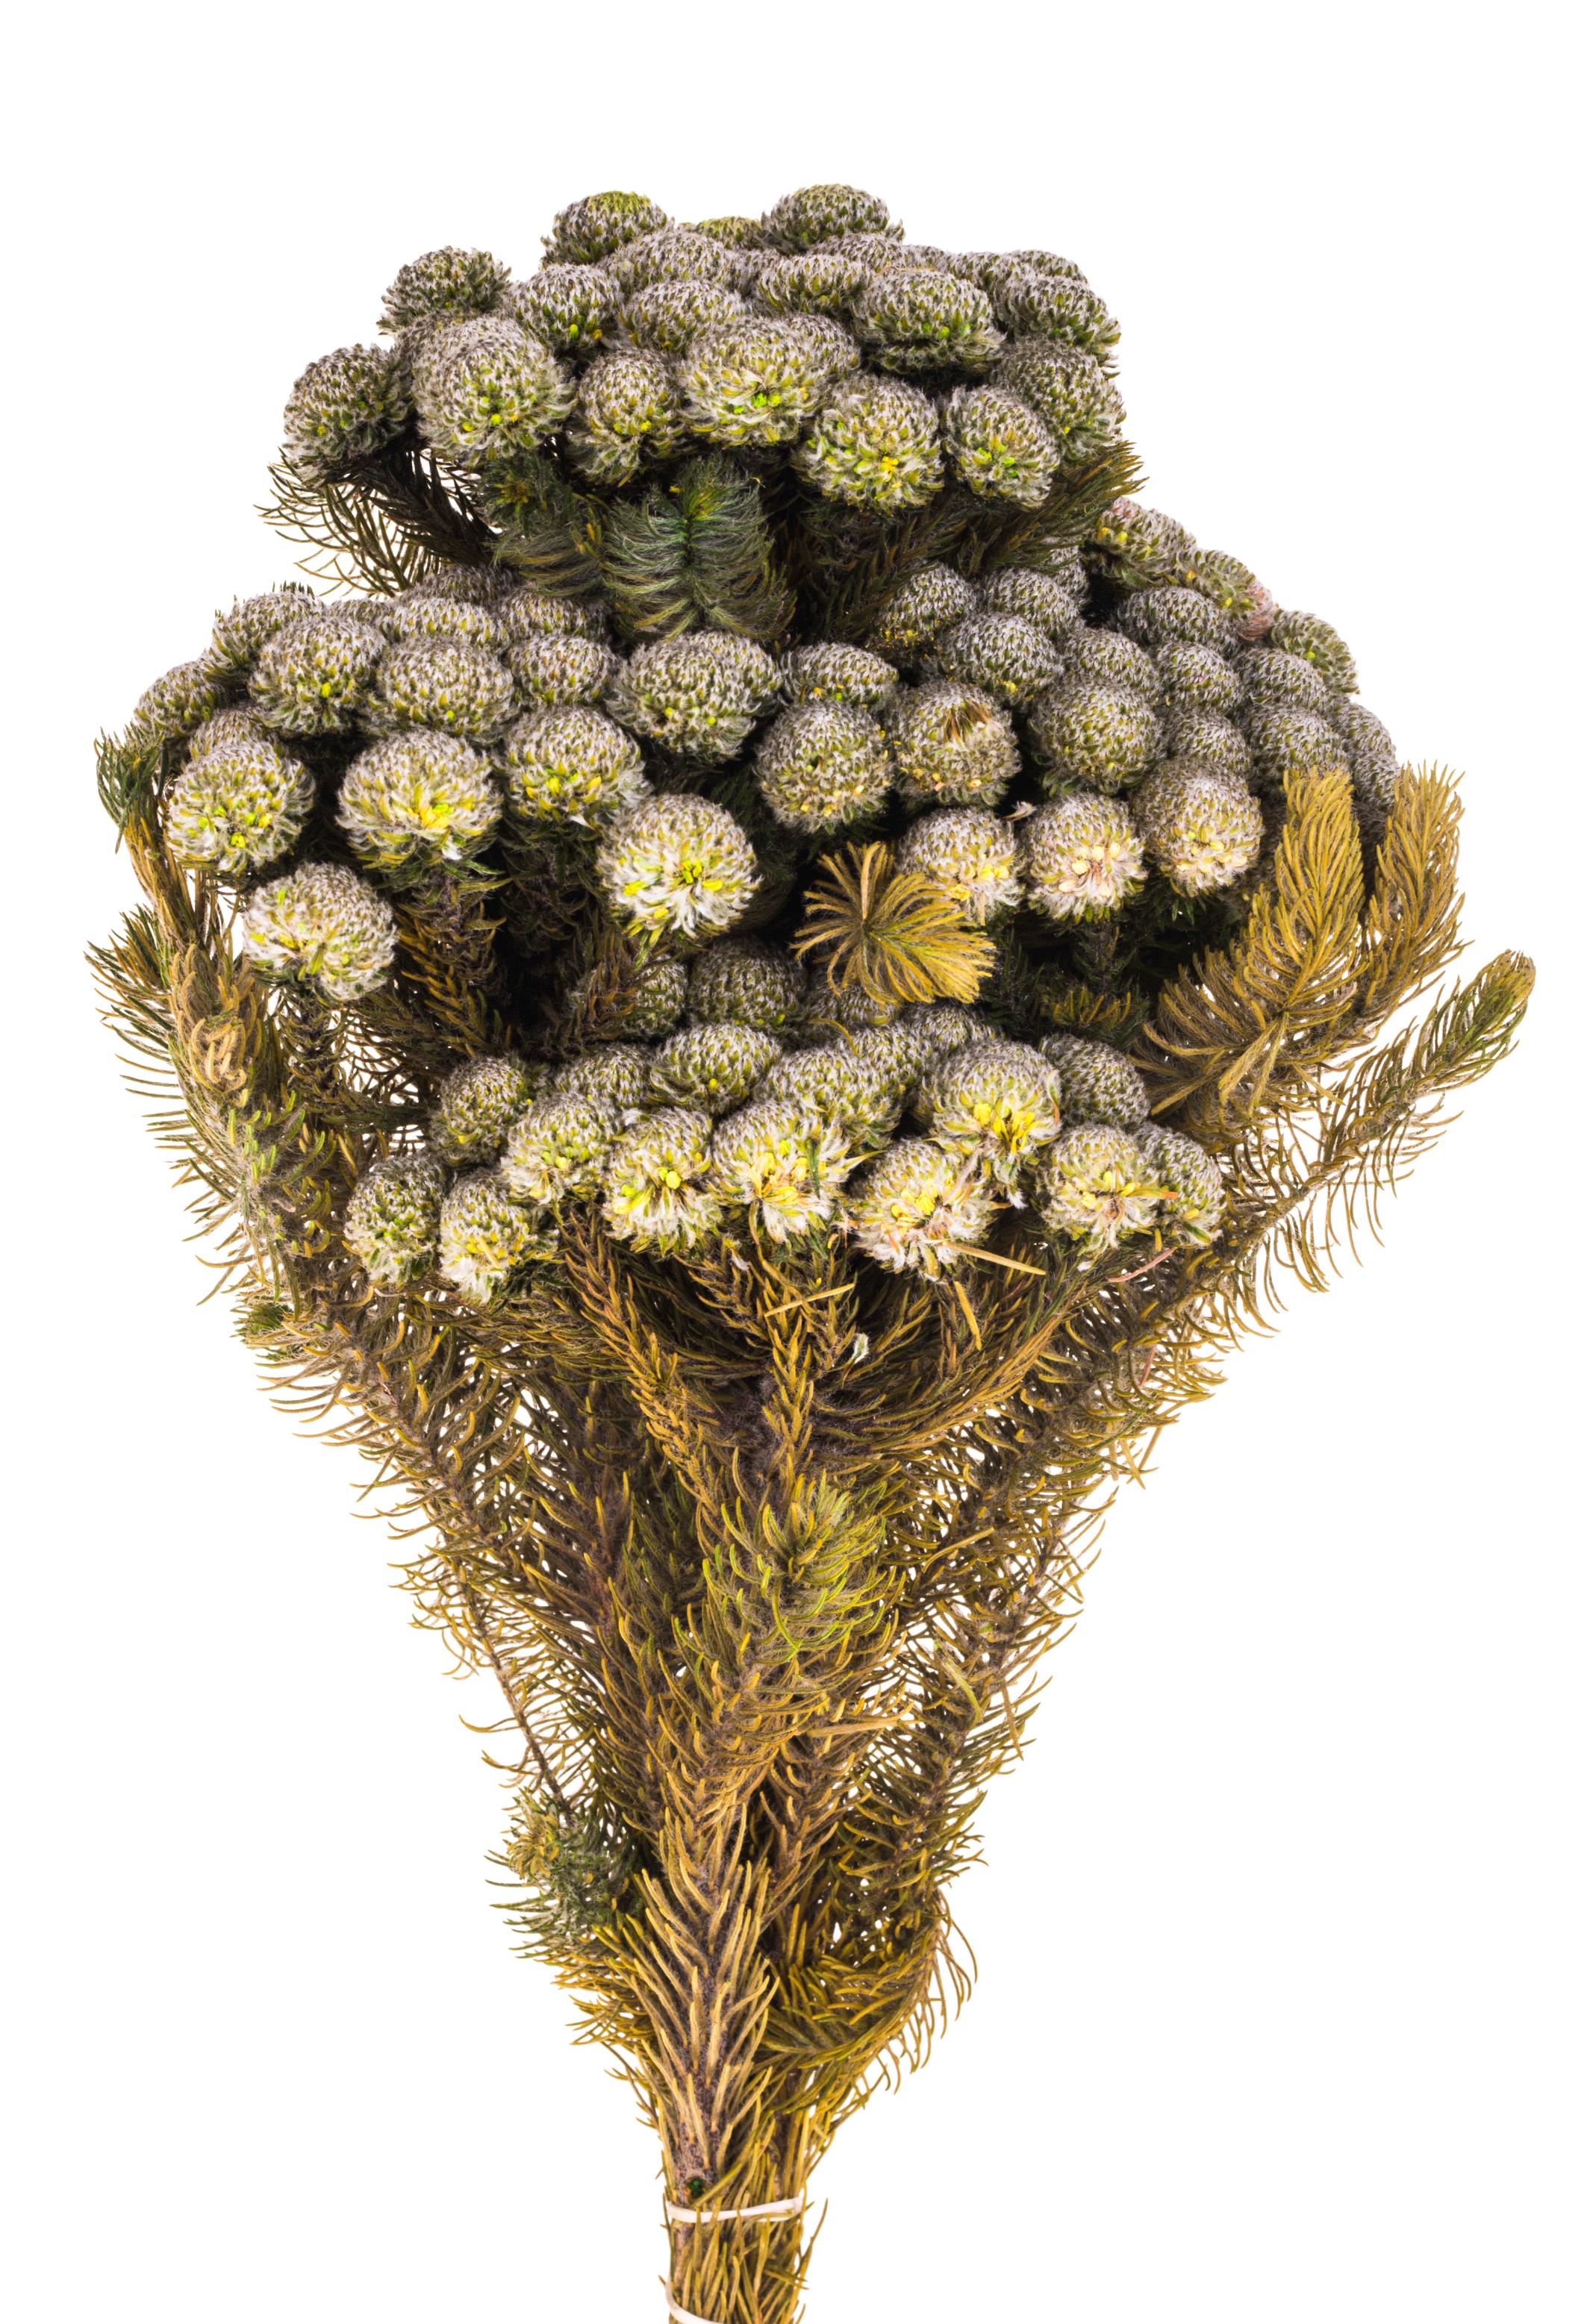 NATURAL PRODUCTS DRIED FLOWERS AND ERBS,BRUNIA ALBIFLORA 25 CM MAZZO SAC.